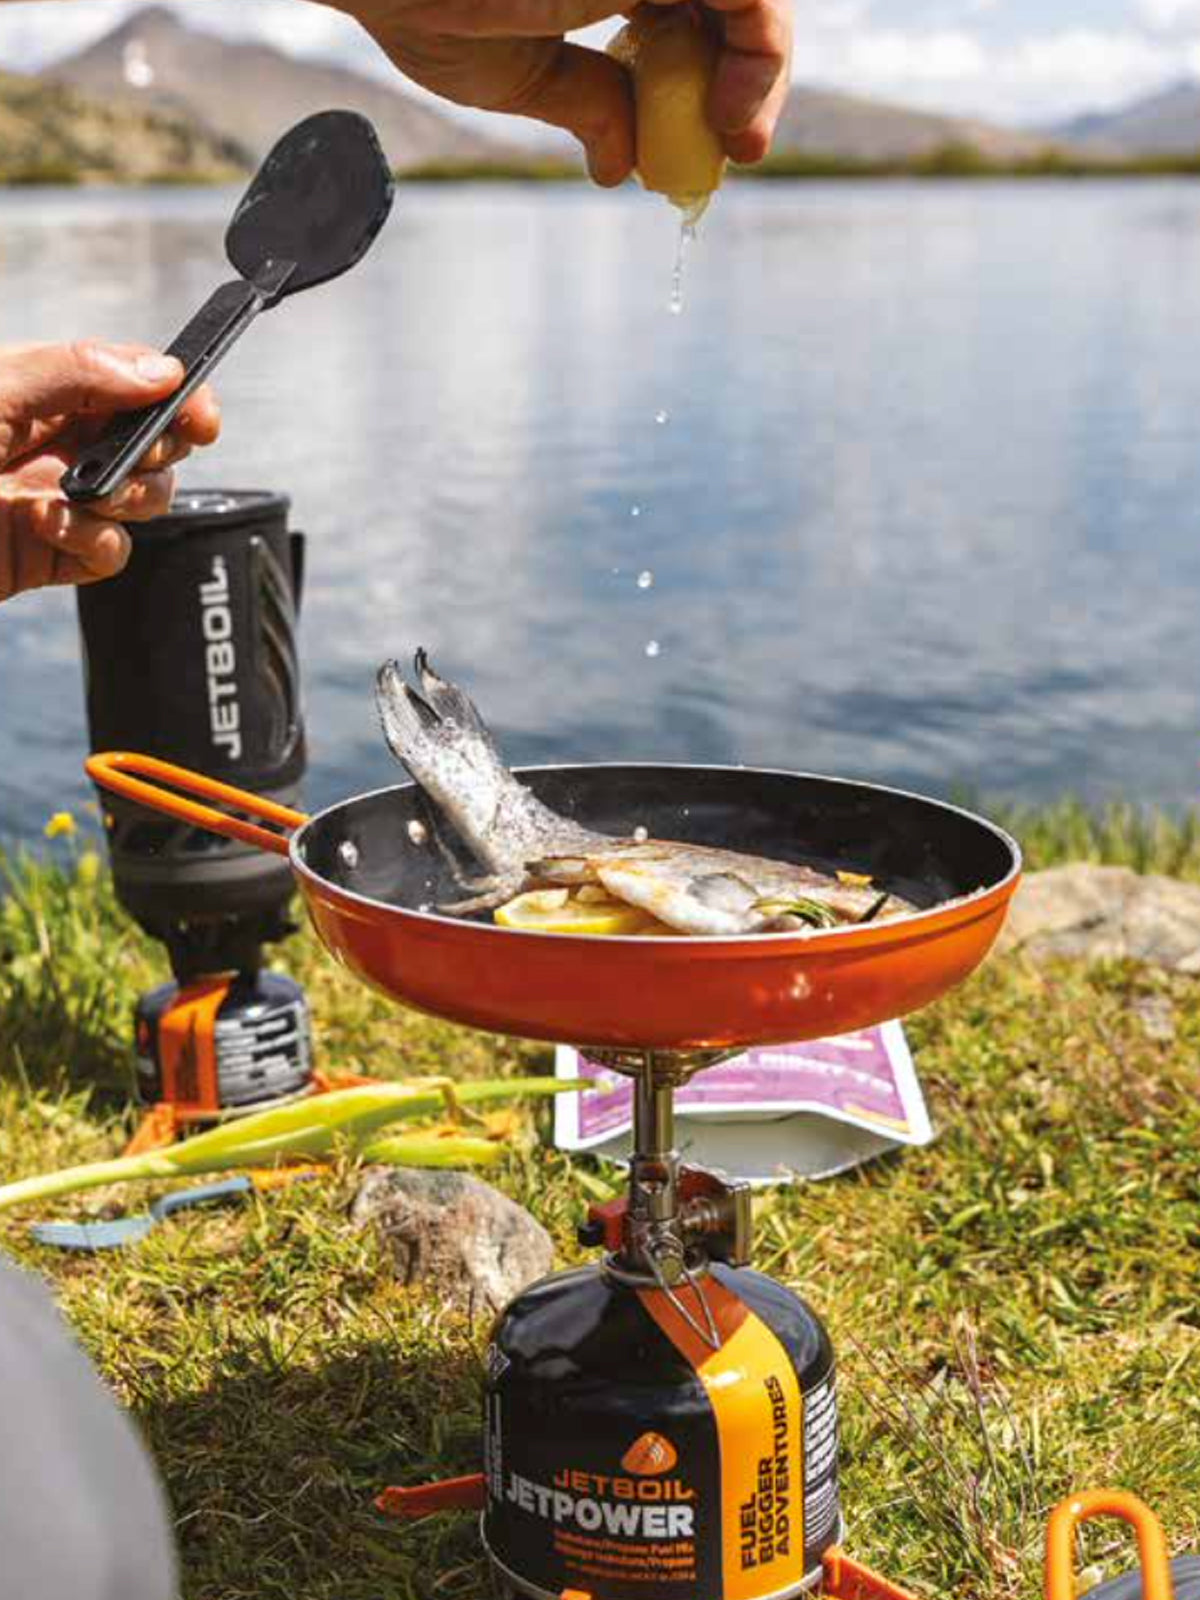 Jetboil MIGHTYMO Stove being used to cook fish in pan